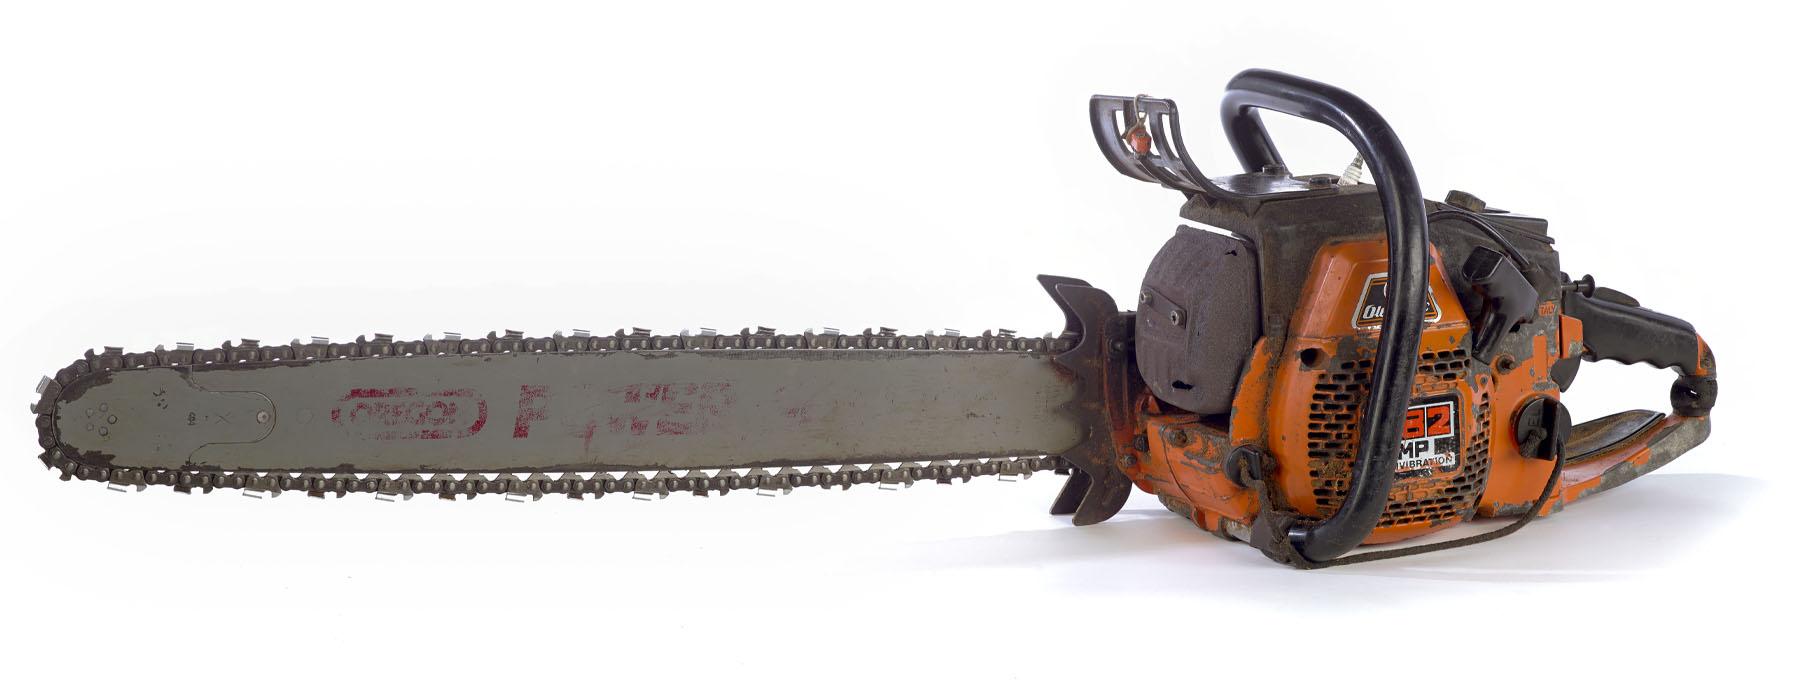 Well-used orange chainsaw